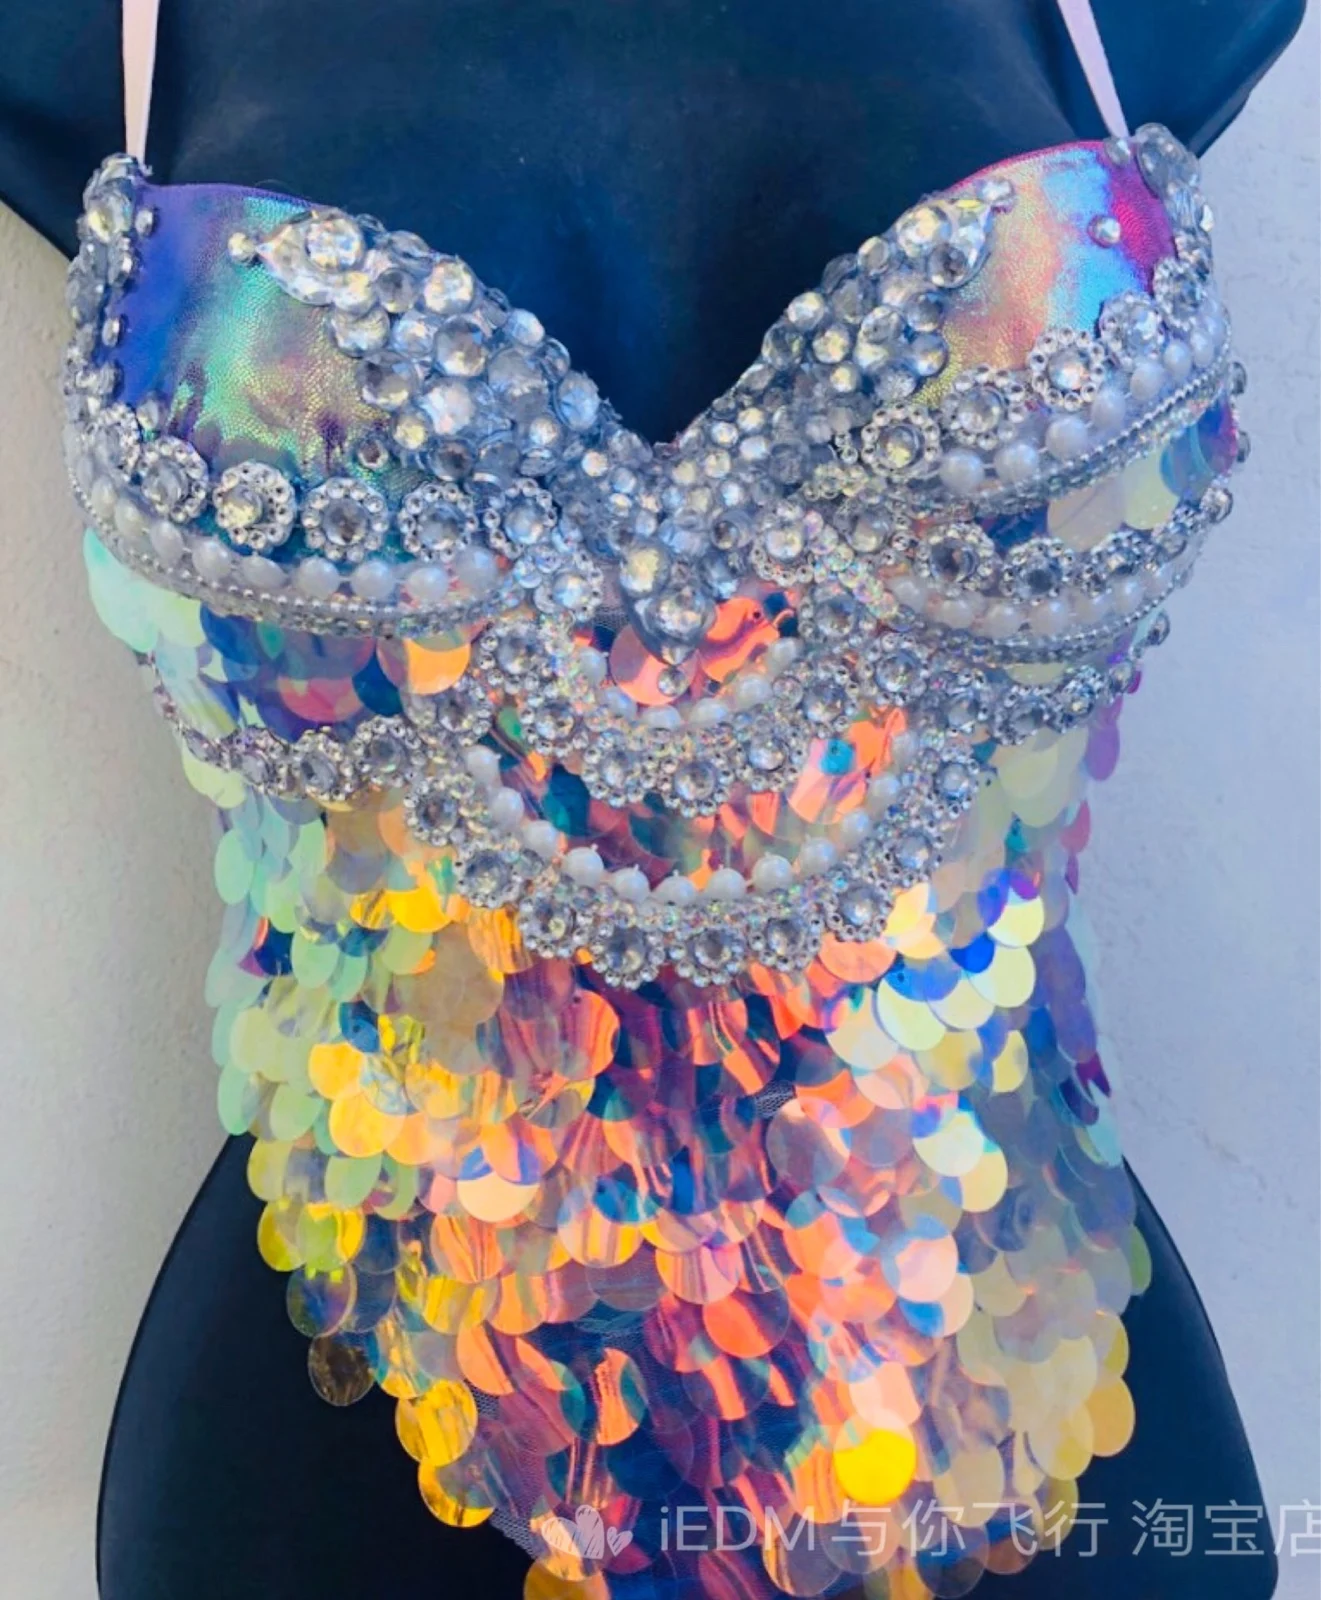 Pearl Mermaid Carnival Bra Rave clothes,rave outfits,edc outfits,rave – THE  LUMI SHOP